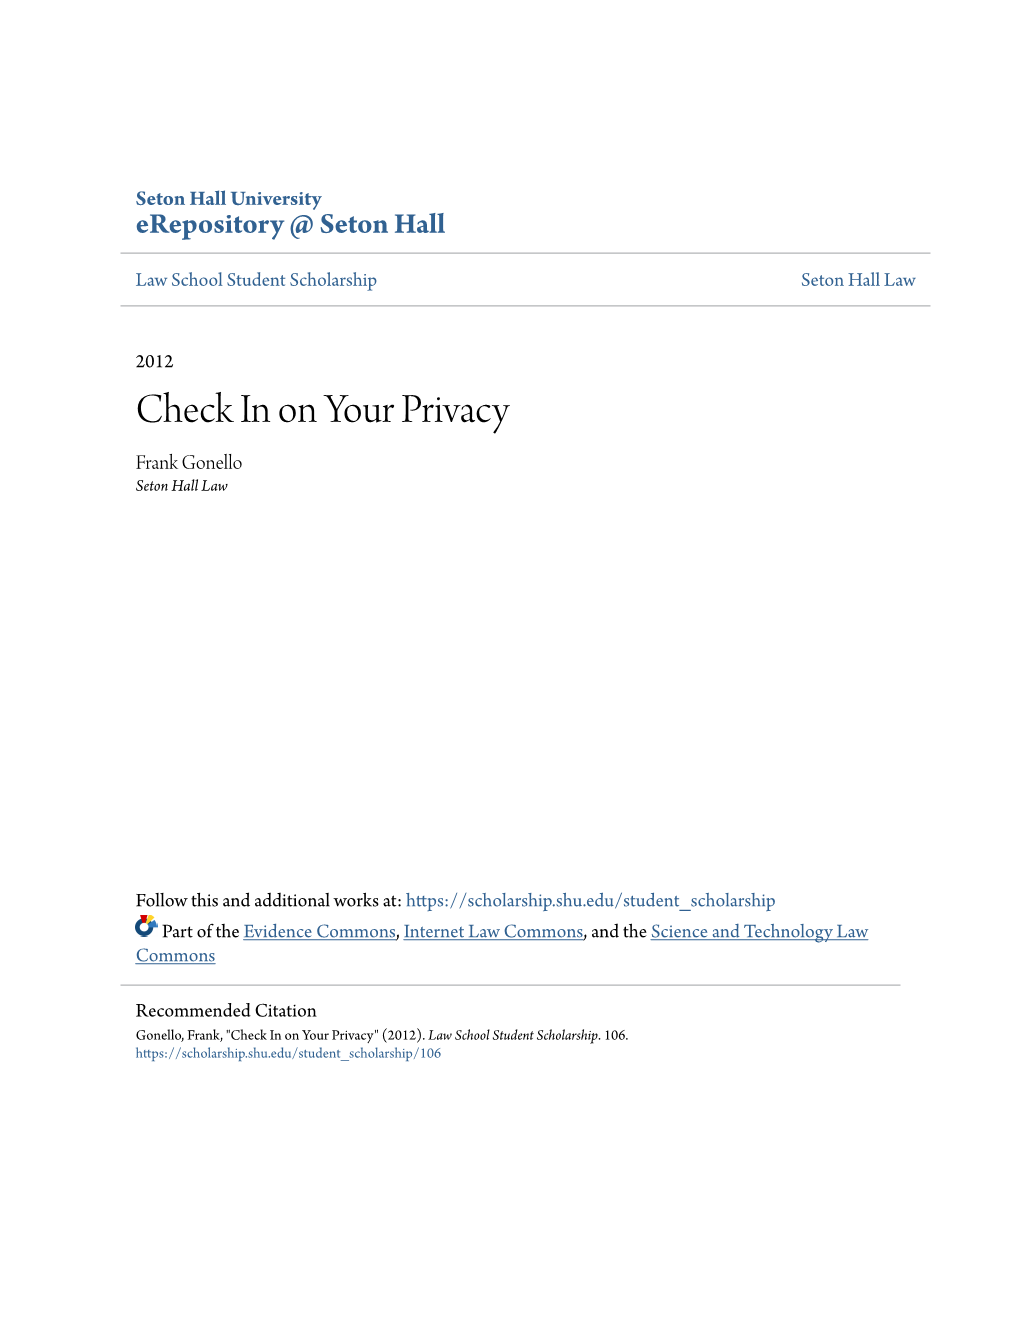 Check in on Your Privacy Frank Gonello Seton Hall Law